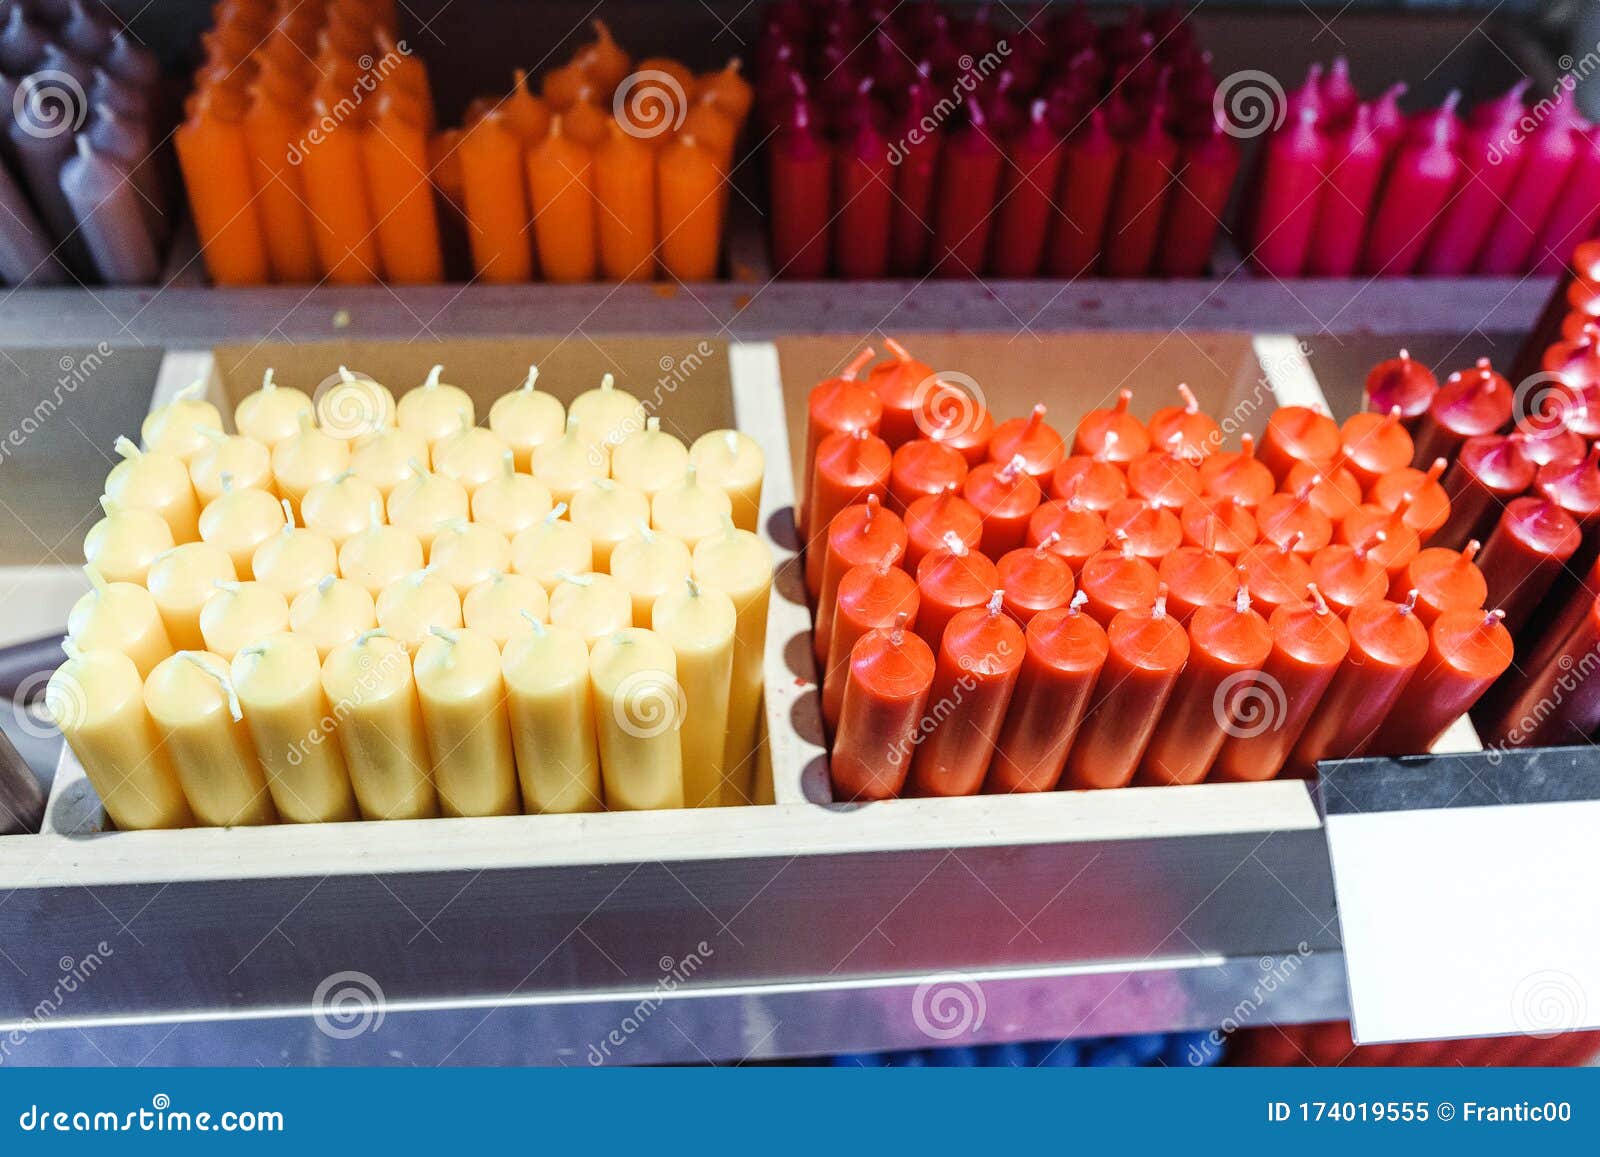 10+ Paraffin Wax Block Stock Photos, Pictures & Royalty-Free